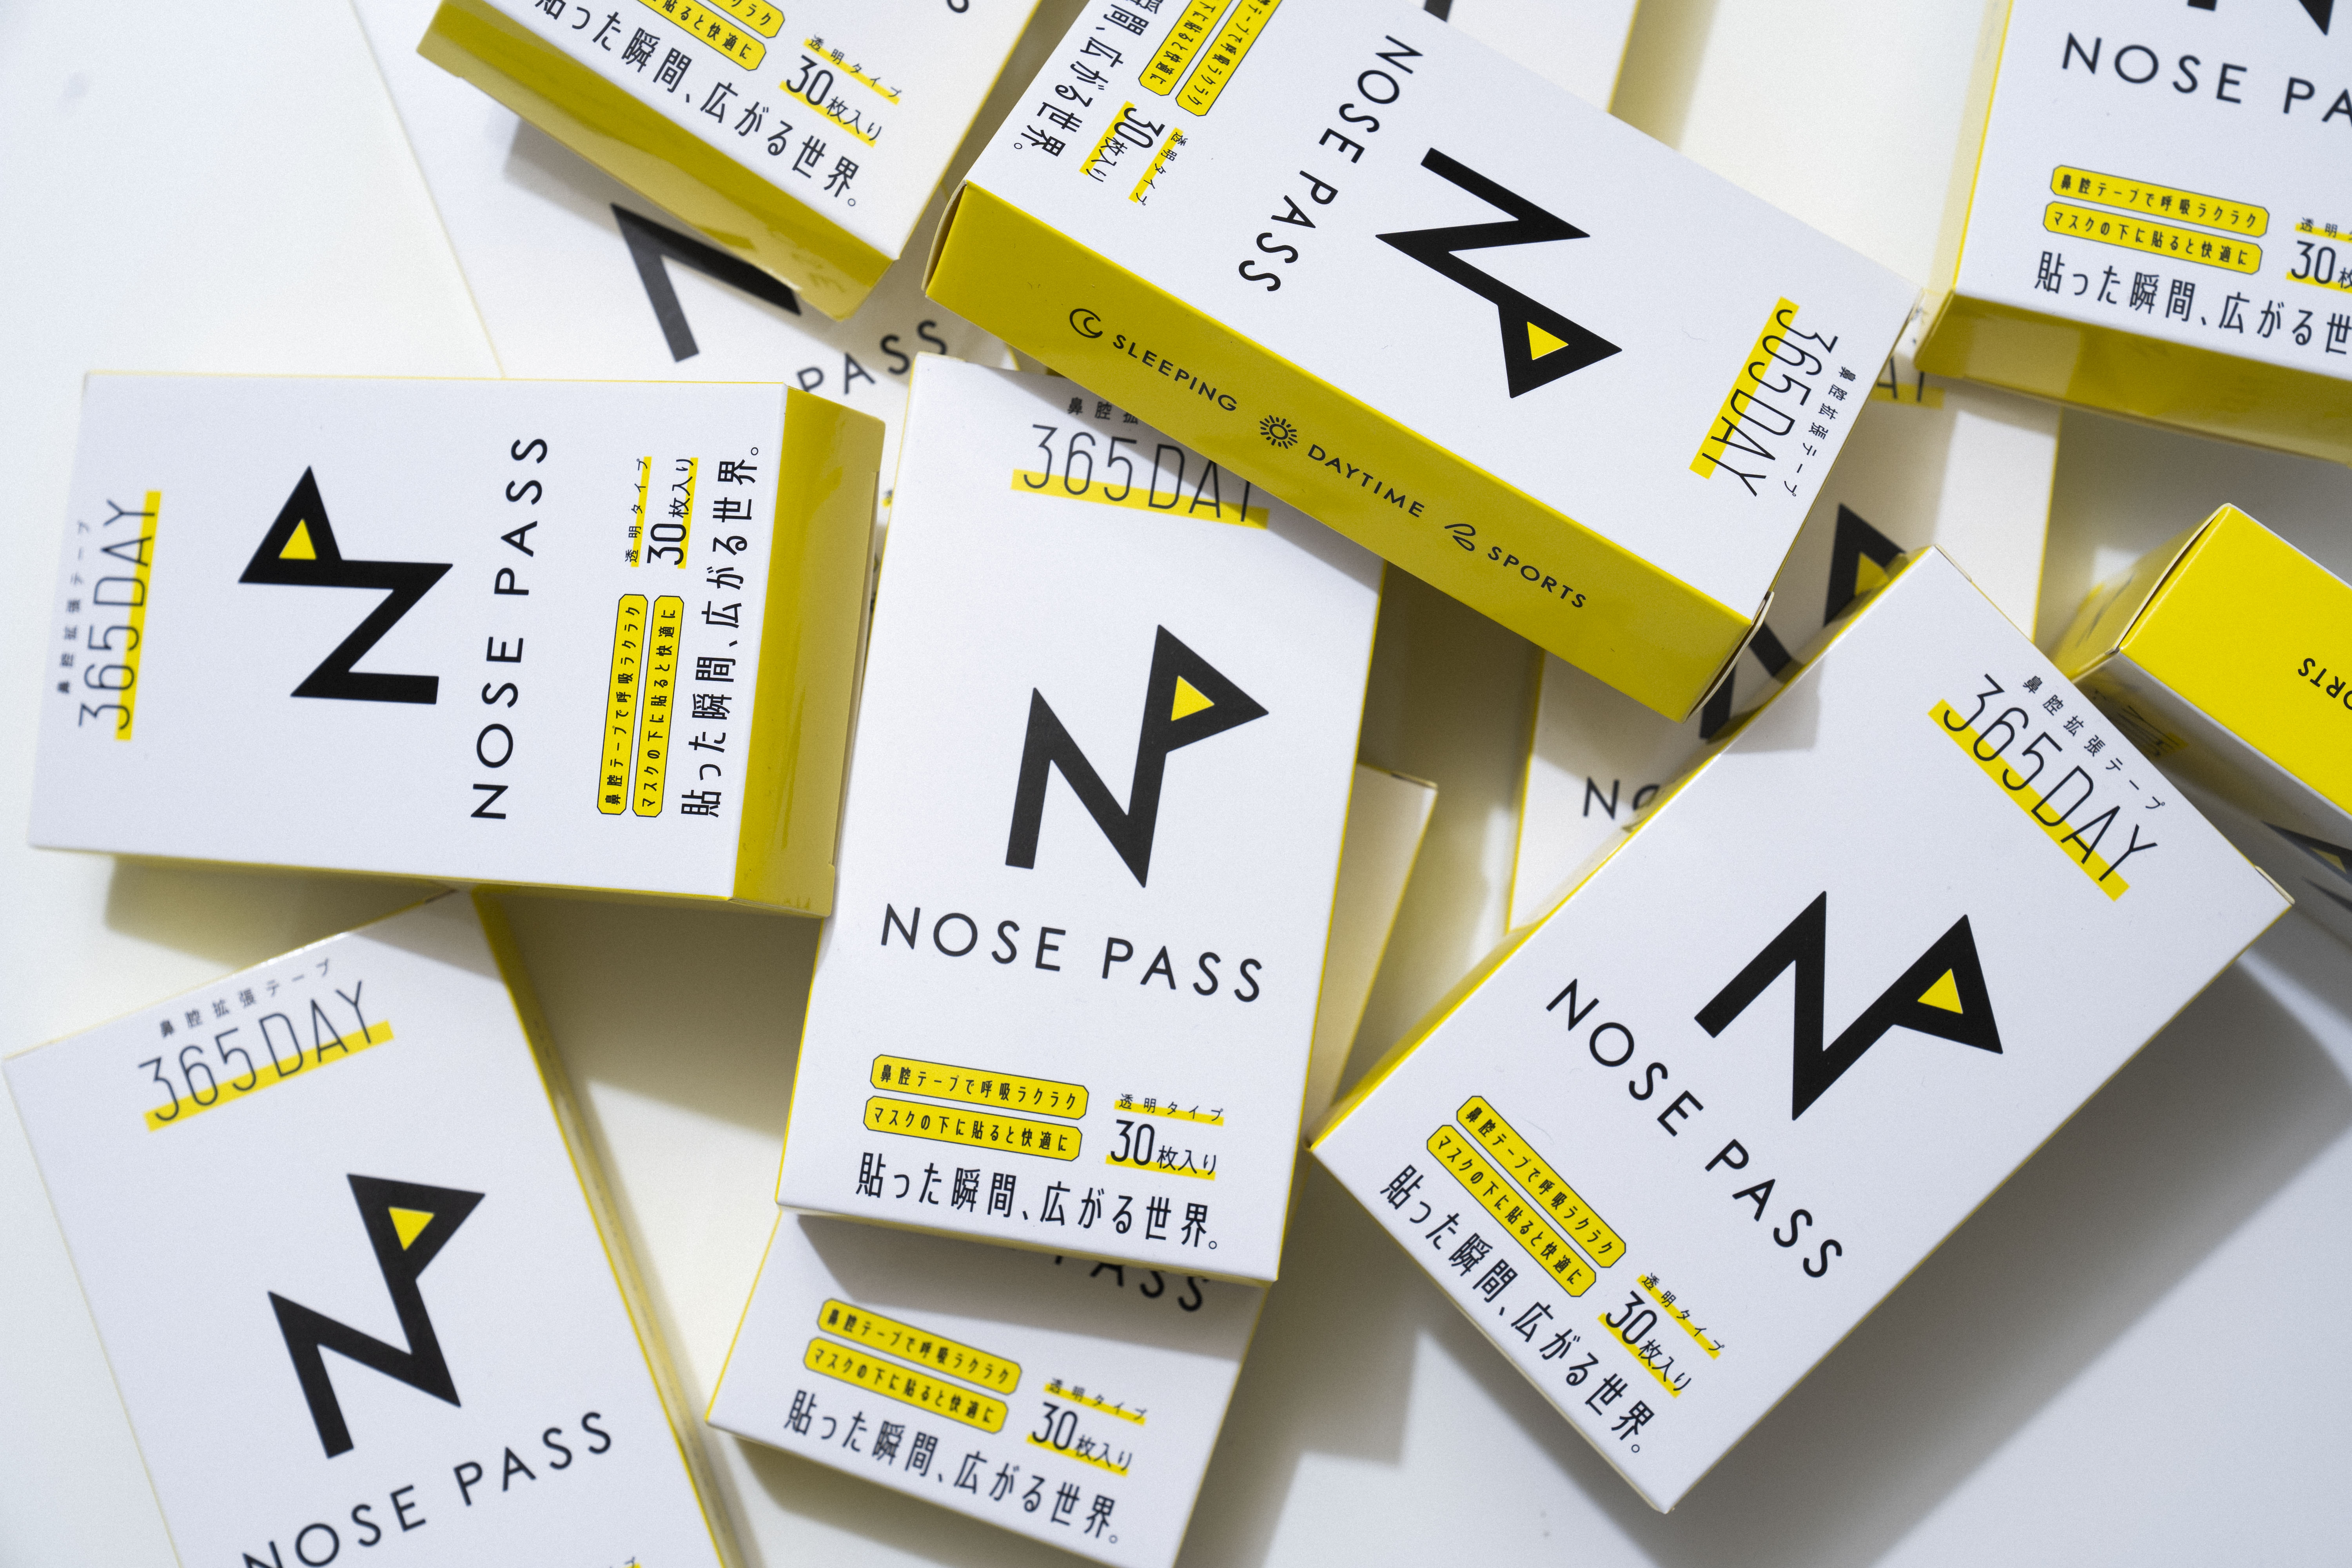 NOSE PASS　鼻腔拡張テープ 30枚入り２個セット